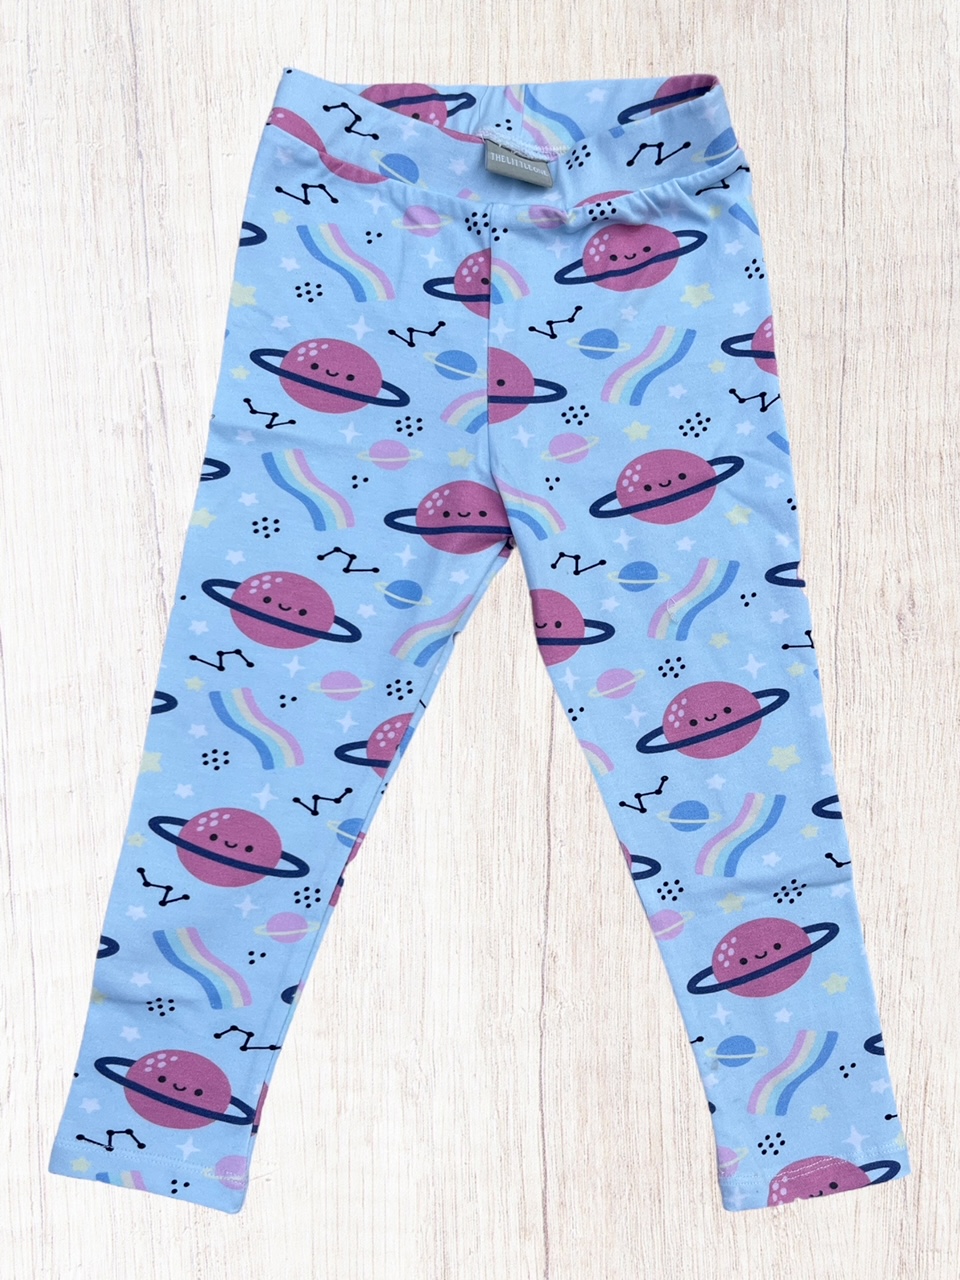 Pastel Planets Leggings - The Little One